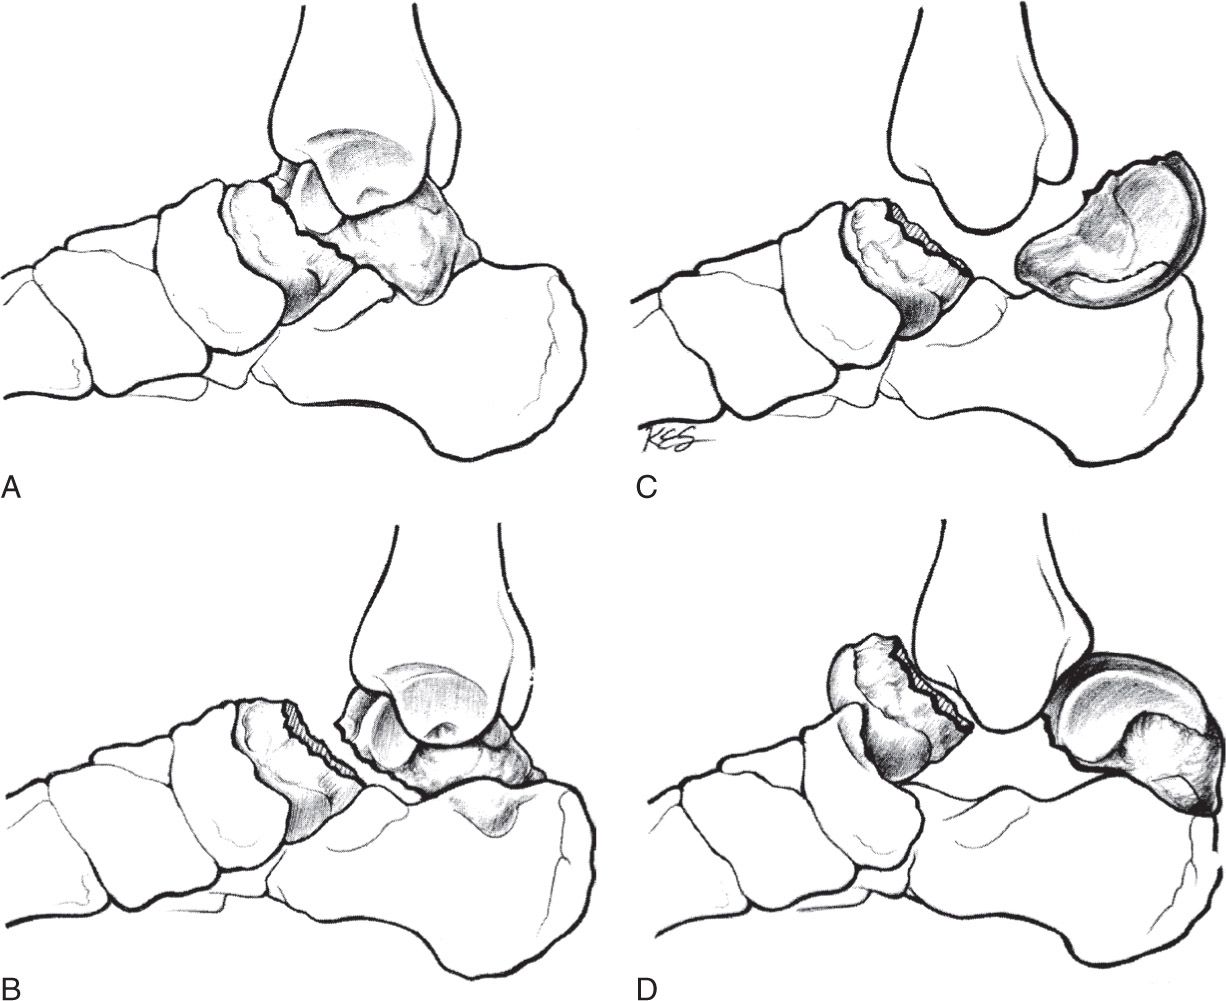 types of talus fractures